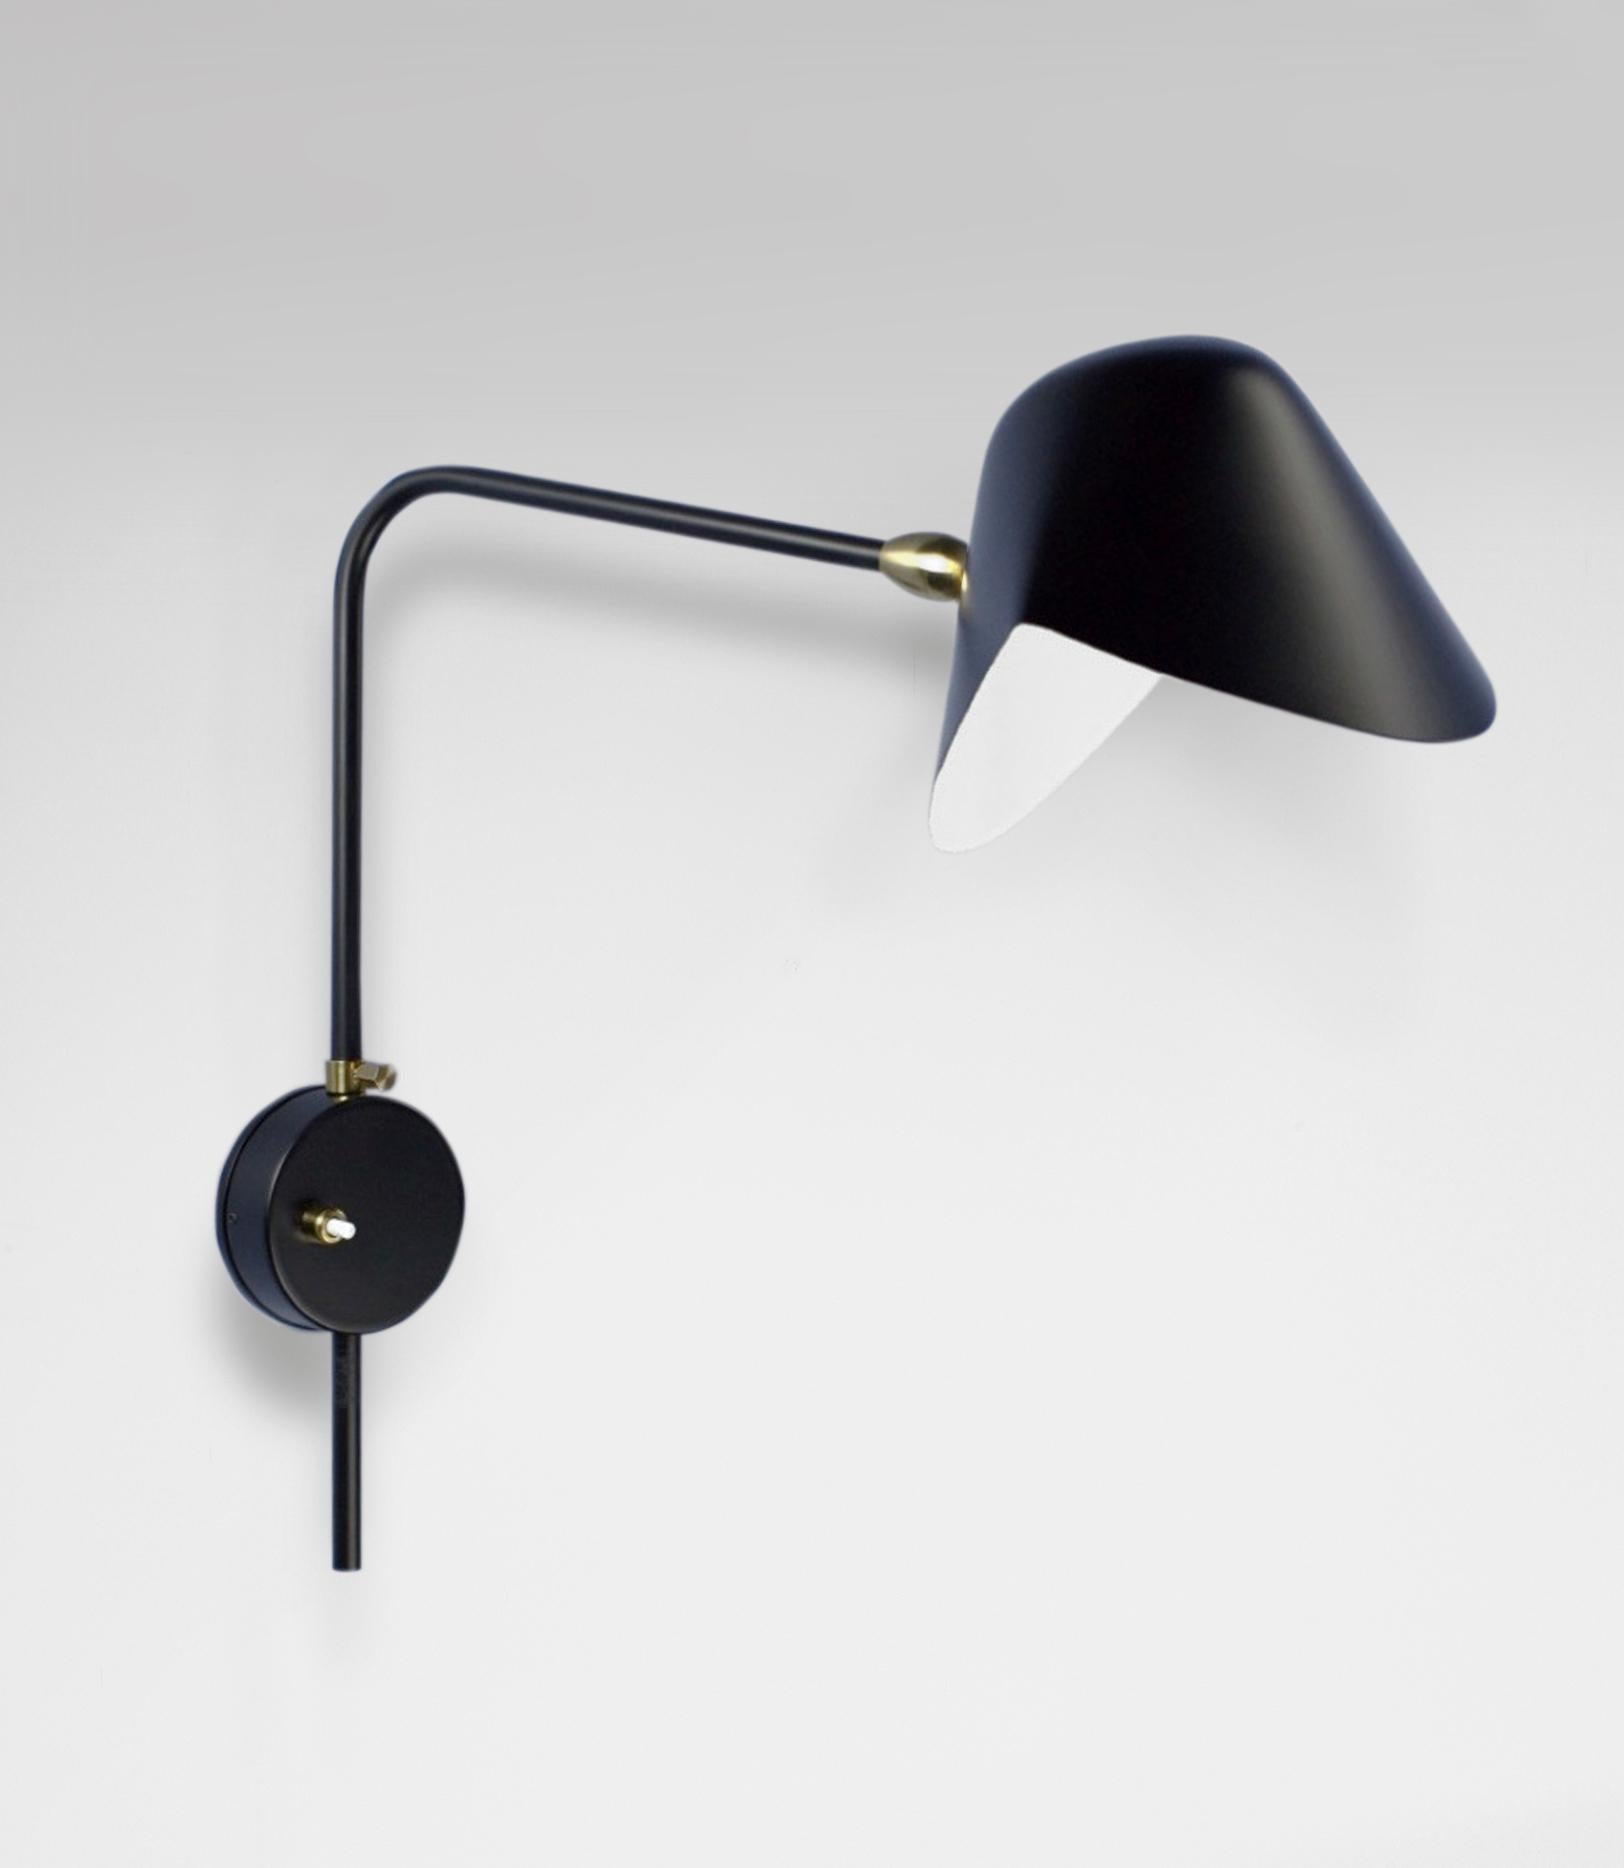 Wall sconce lamp model 'Anthony Wall Lamp Whit Round Fixation Box' designed by Serge Mouille in 1953.

Manufactured by Editions Serge Mouille in France. The production of lamps, wall lights and floor lamps are manufactured using craftsman’s